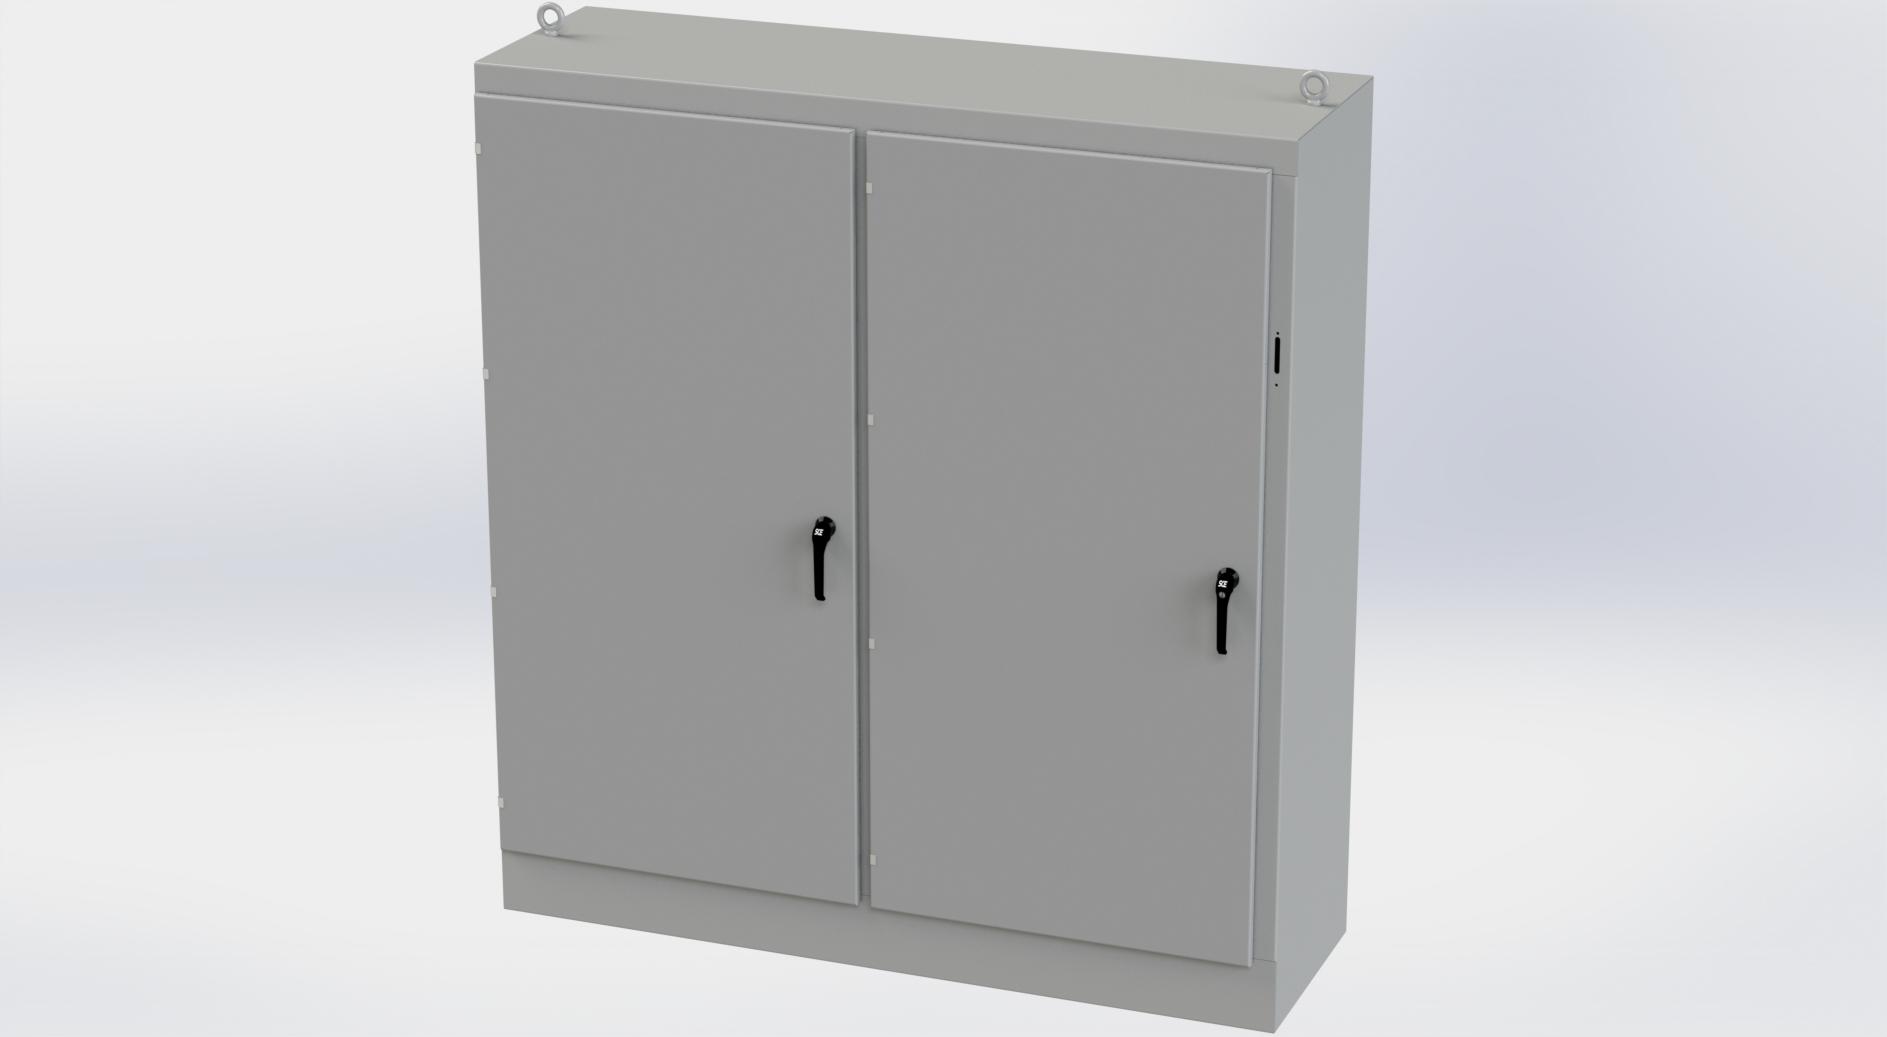 Saginaw Control SCE-84XM7824 2DR XM Enclosure, Height:84.00", Width:77.75", Depth:24.00", ANSI-61 gray powder coating inside and out. Sub-panels are powder coated white.